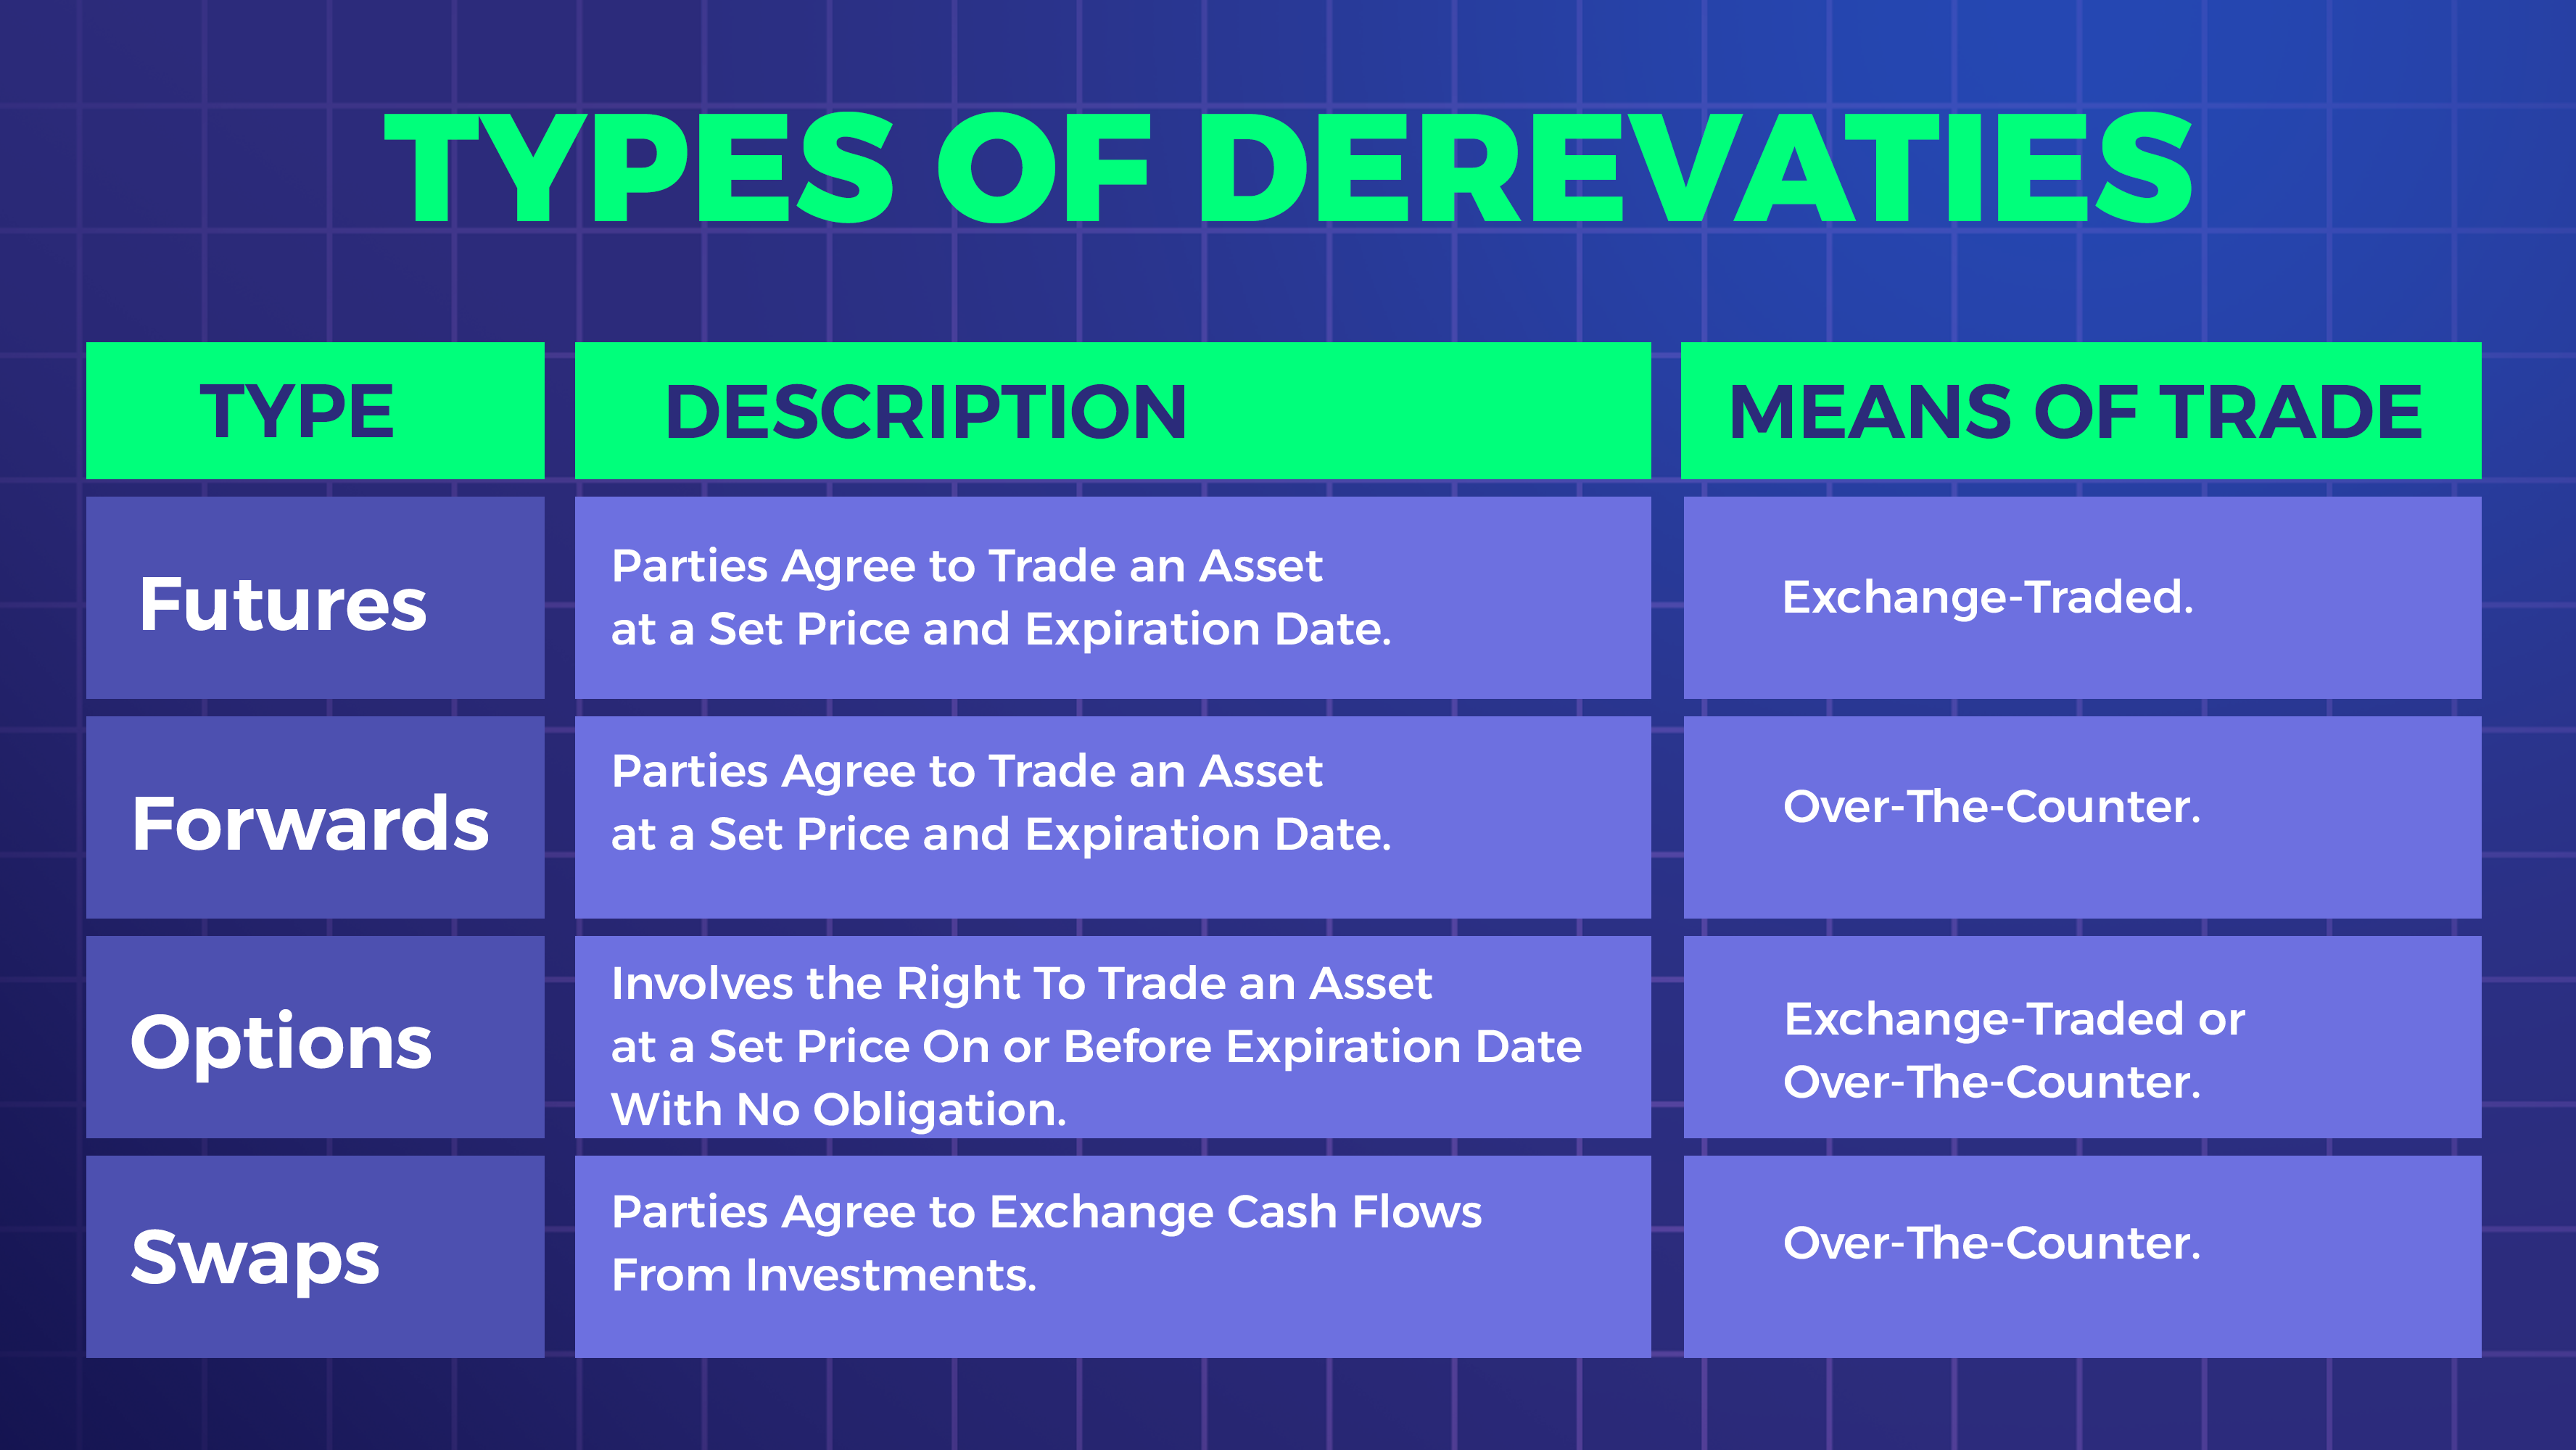 Types of Derivatives